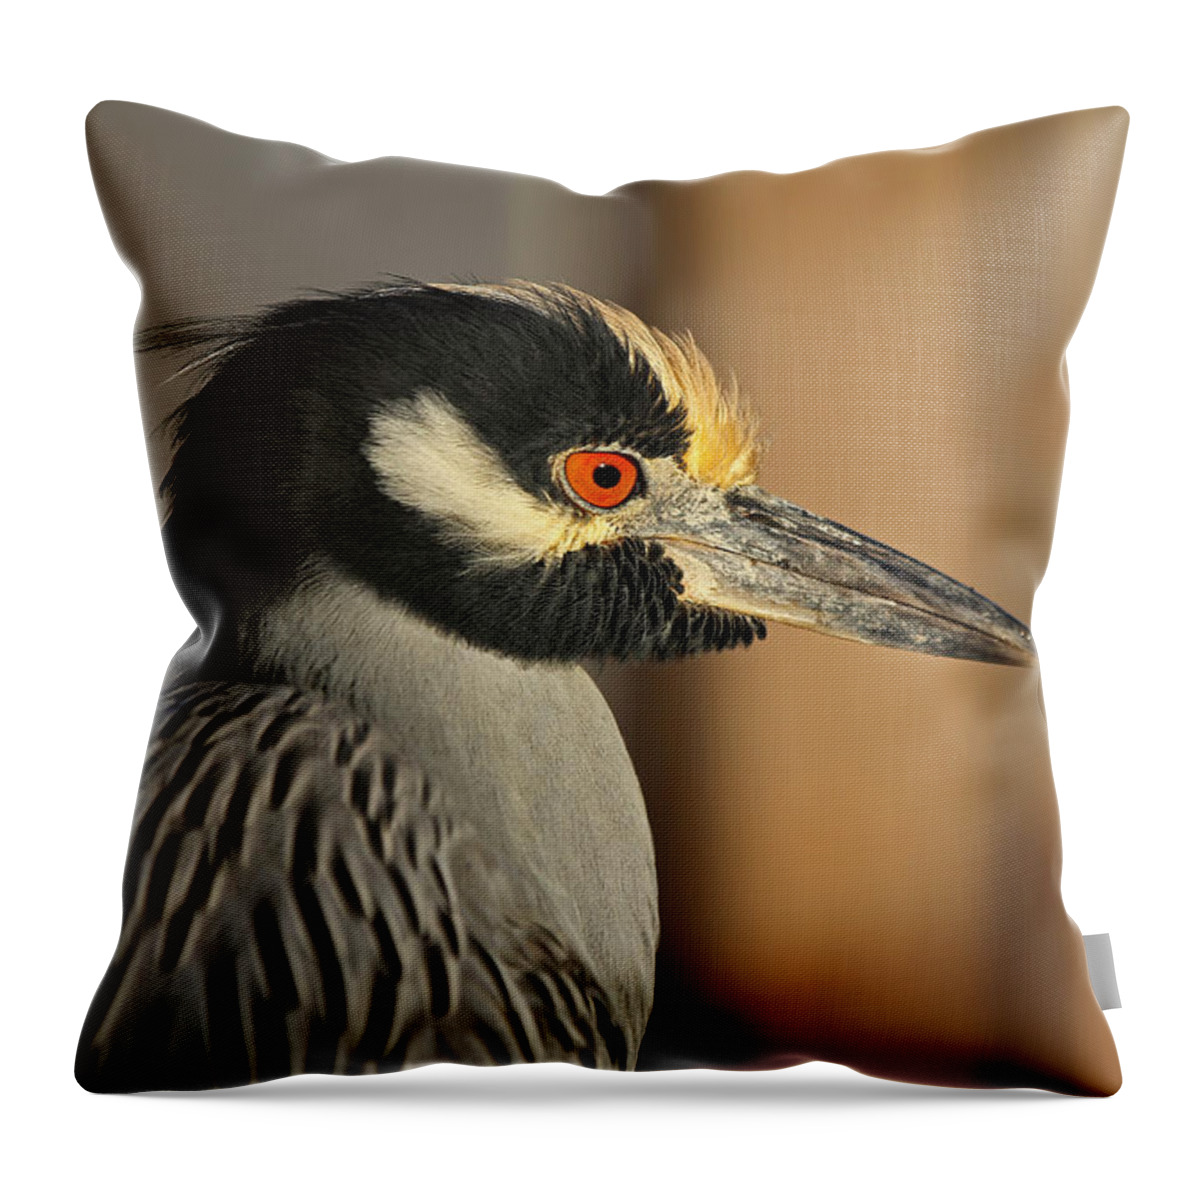 Heron Throw Pillow featuring the photograph Black Crowned Night Heron by Juergen Roth